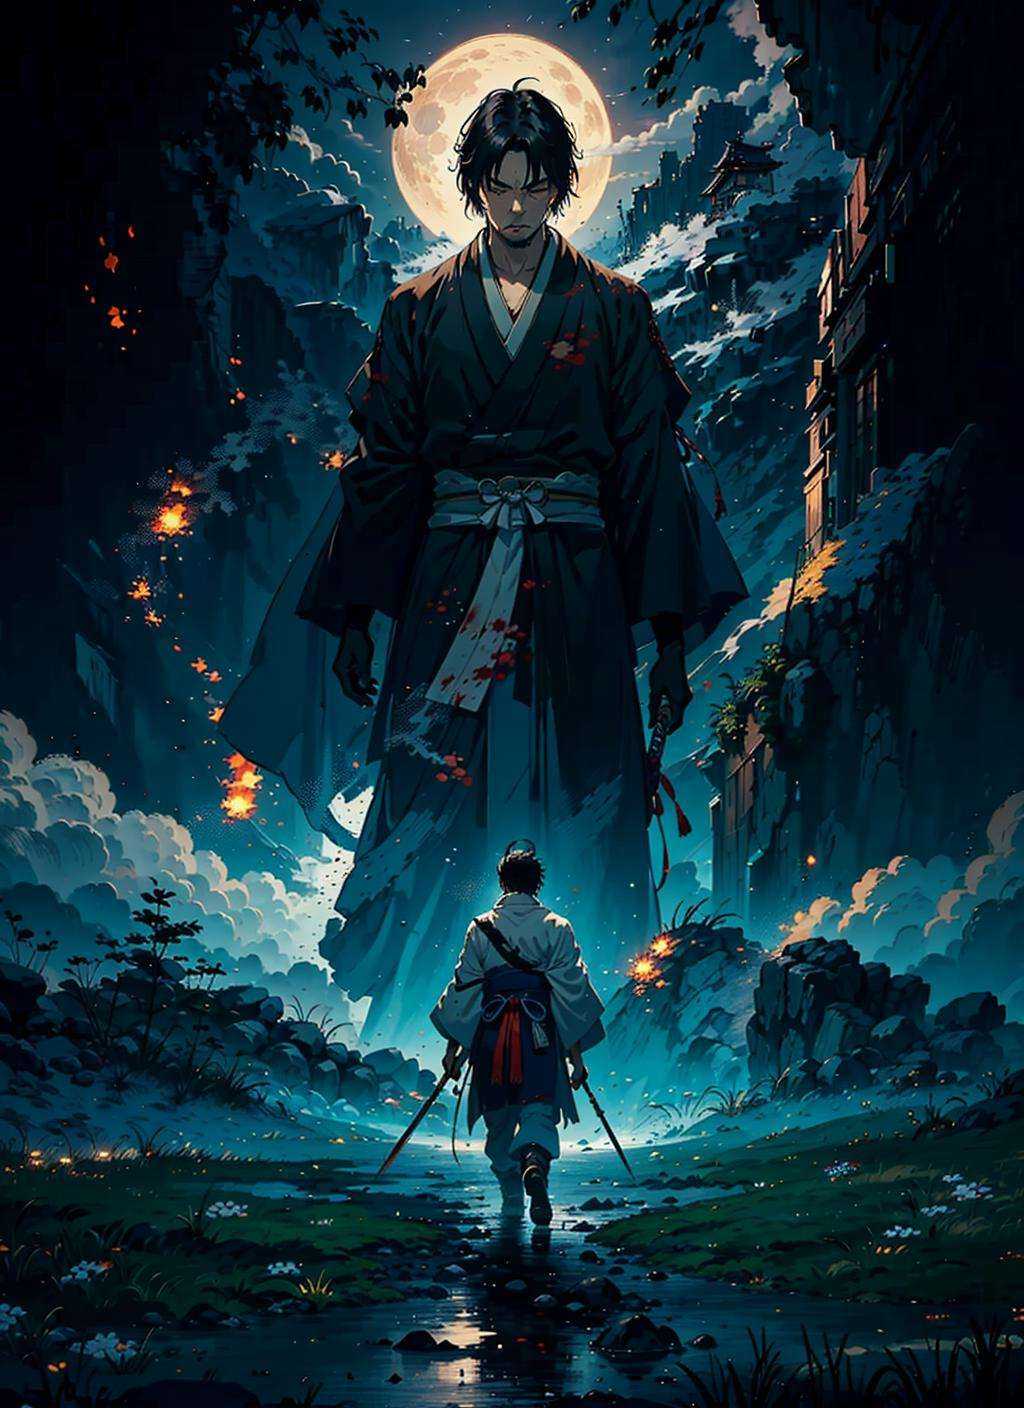 Isshin, the Sword Saint is a legendary warrior and the founder of the Ashina Clan. He is an old man with white hair and beard, wearing a blue kimono with black patterns and a white cloak. He carries  a katana and a spear. He also has a gun hidden in his sleeve.He awaits Sekiro in the great grass field where he first fought Genichiro Ashina, his grandson. The field is covered with blood and corpses of soldiers who died in the battle. The sky is dark and stormy, and lightning flashes occasionally. Isshin emerges from Genichiro’s body after he sacrifices himself to revive him using the Black Mortal Blade. He respects Sekiro as a worthy opponent and challenges him to a final duel for the fate of Ashina.moon, dark theme, light, fantasy,